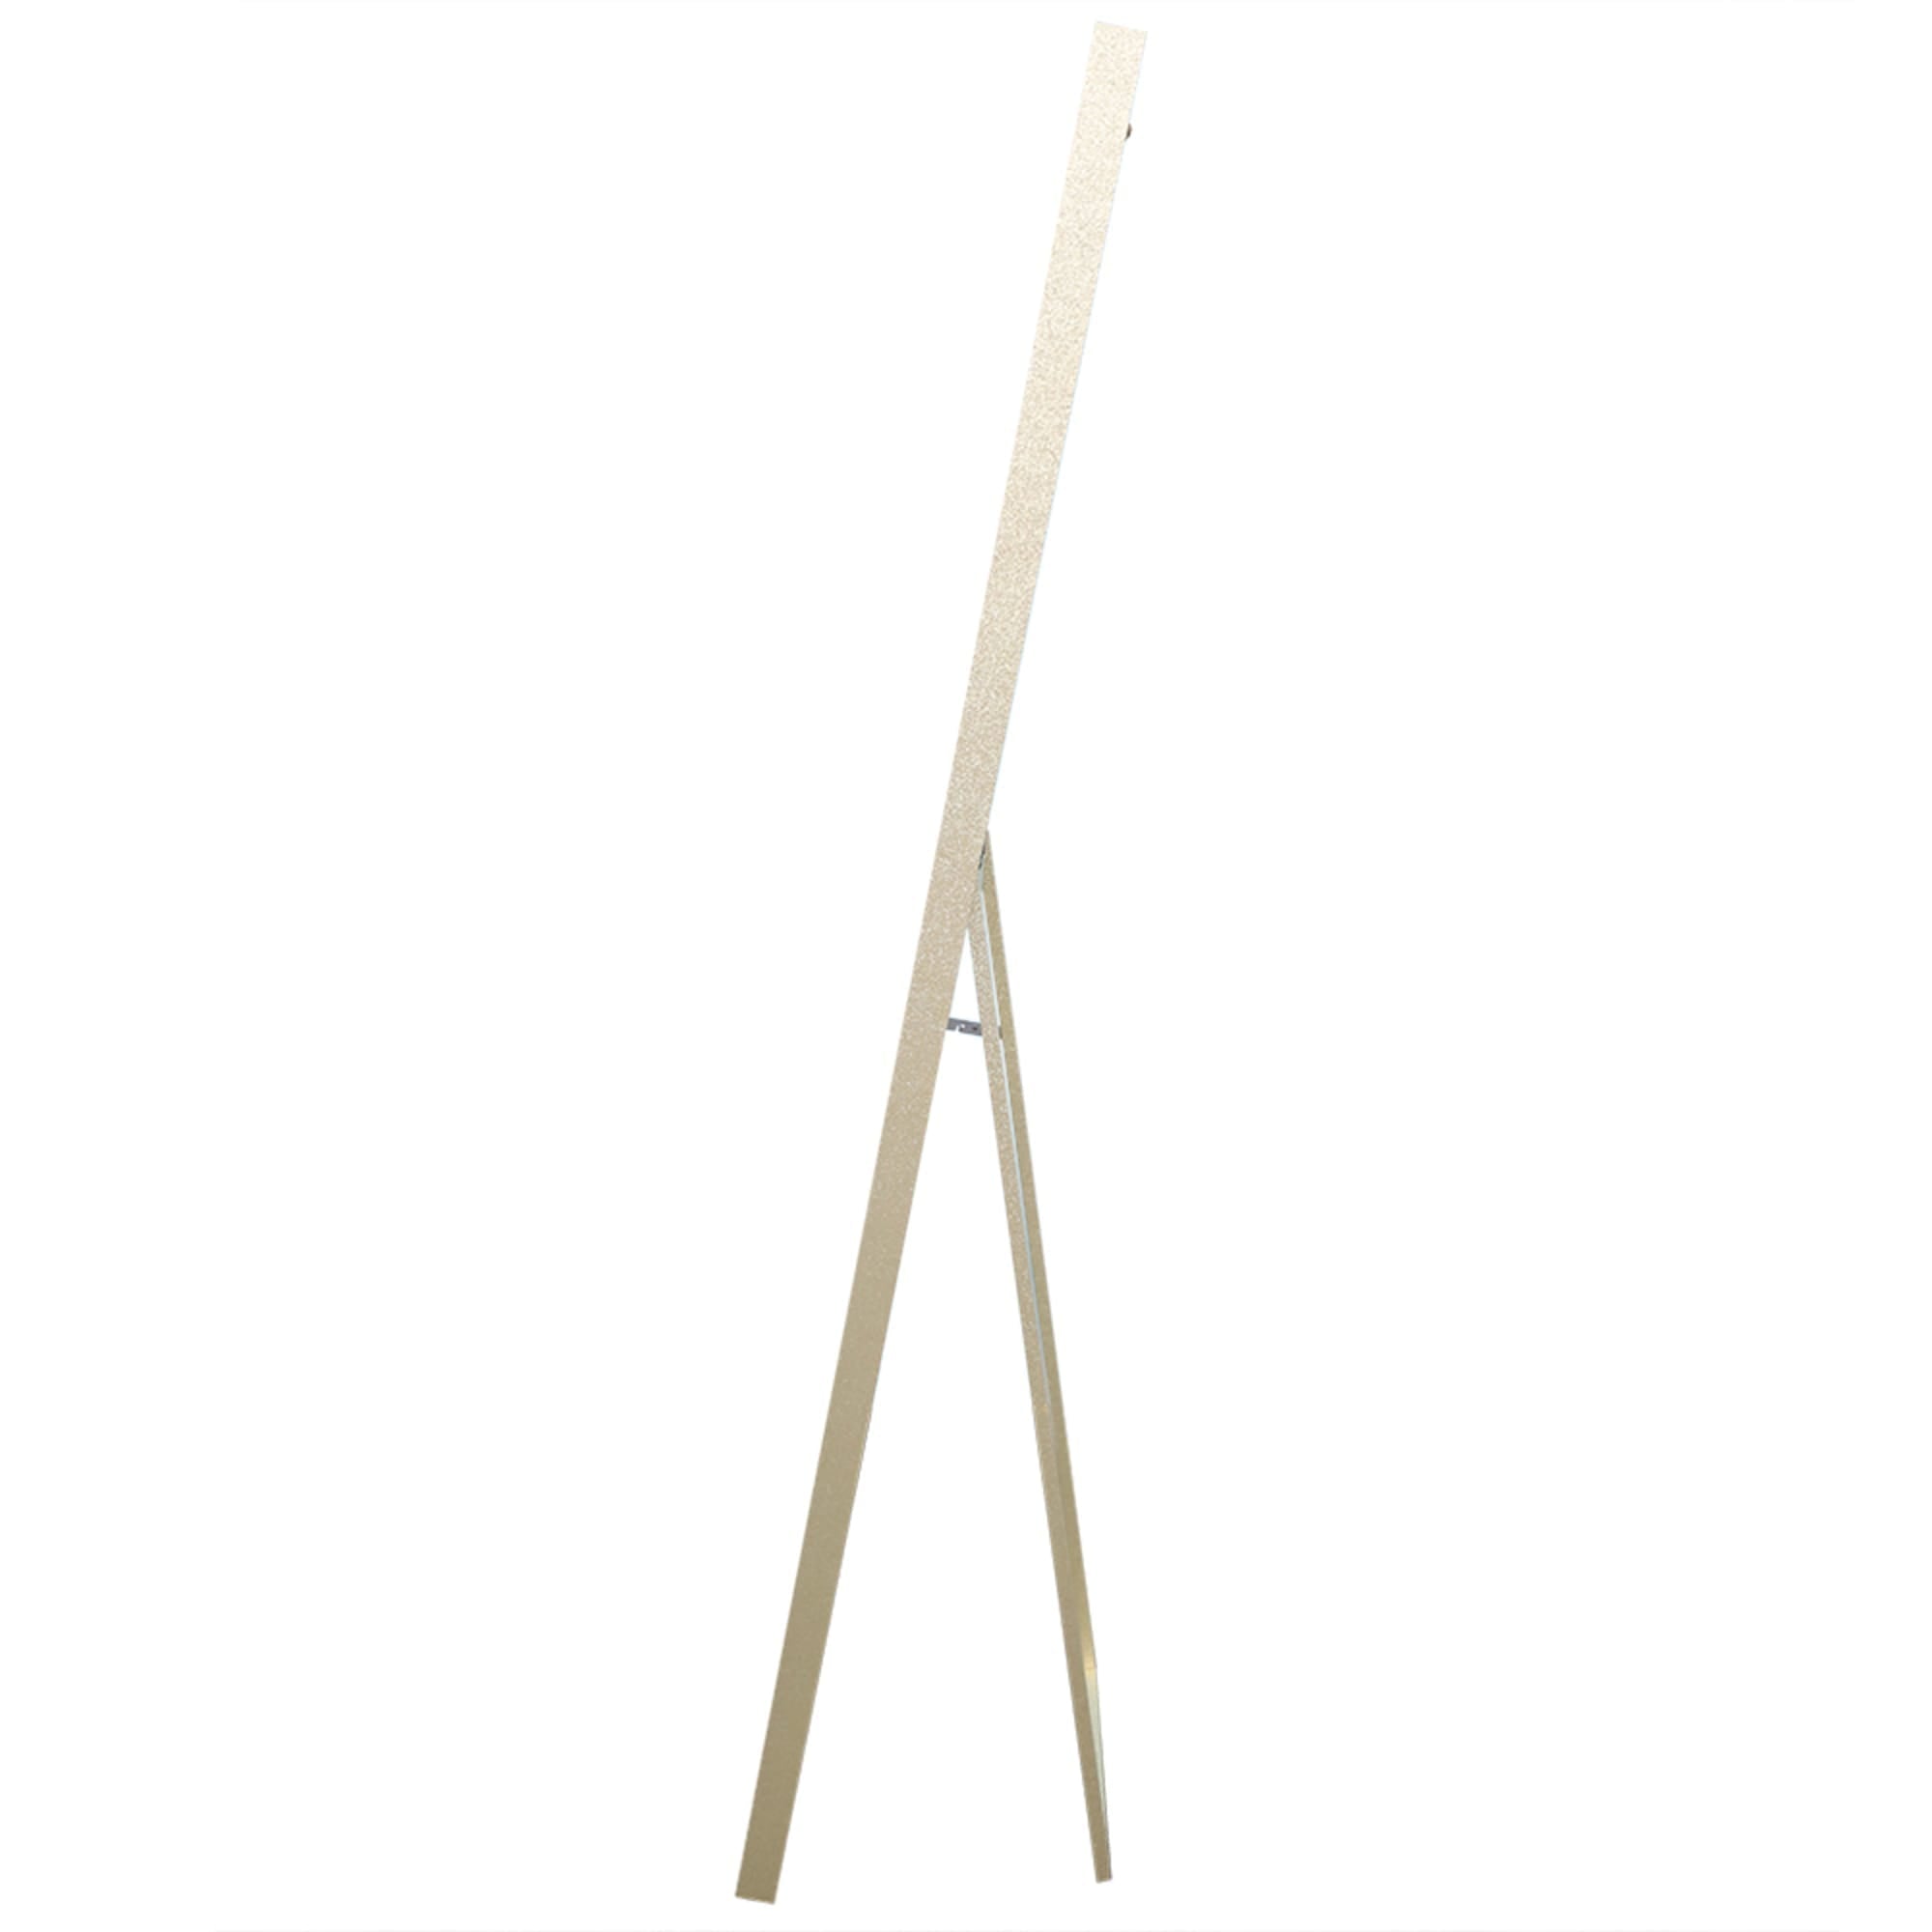 Home Basics 11” x 58” Easel Back Full Length Mirror with MDF Frame, Gold $20.00 EACH, CASE PACK OF 4